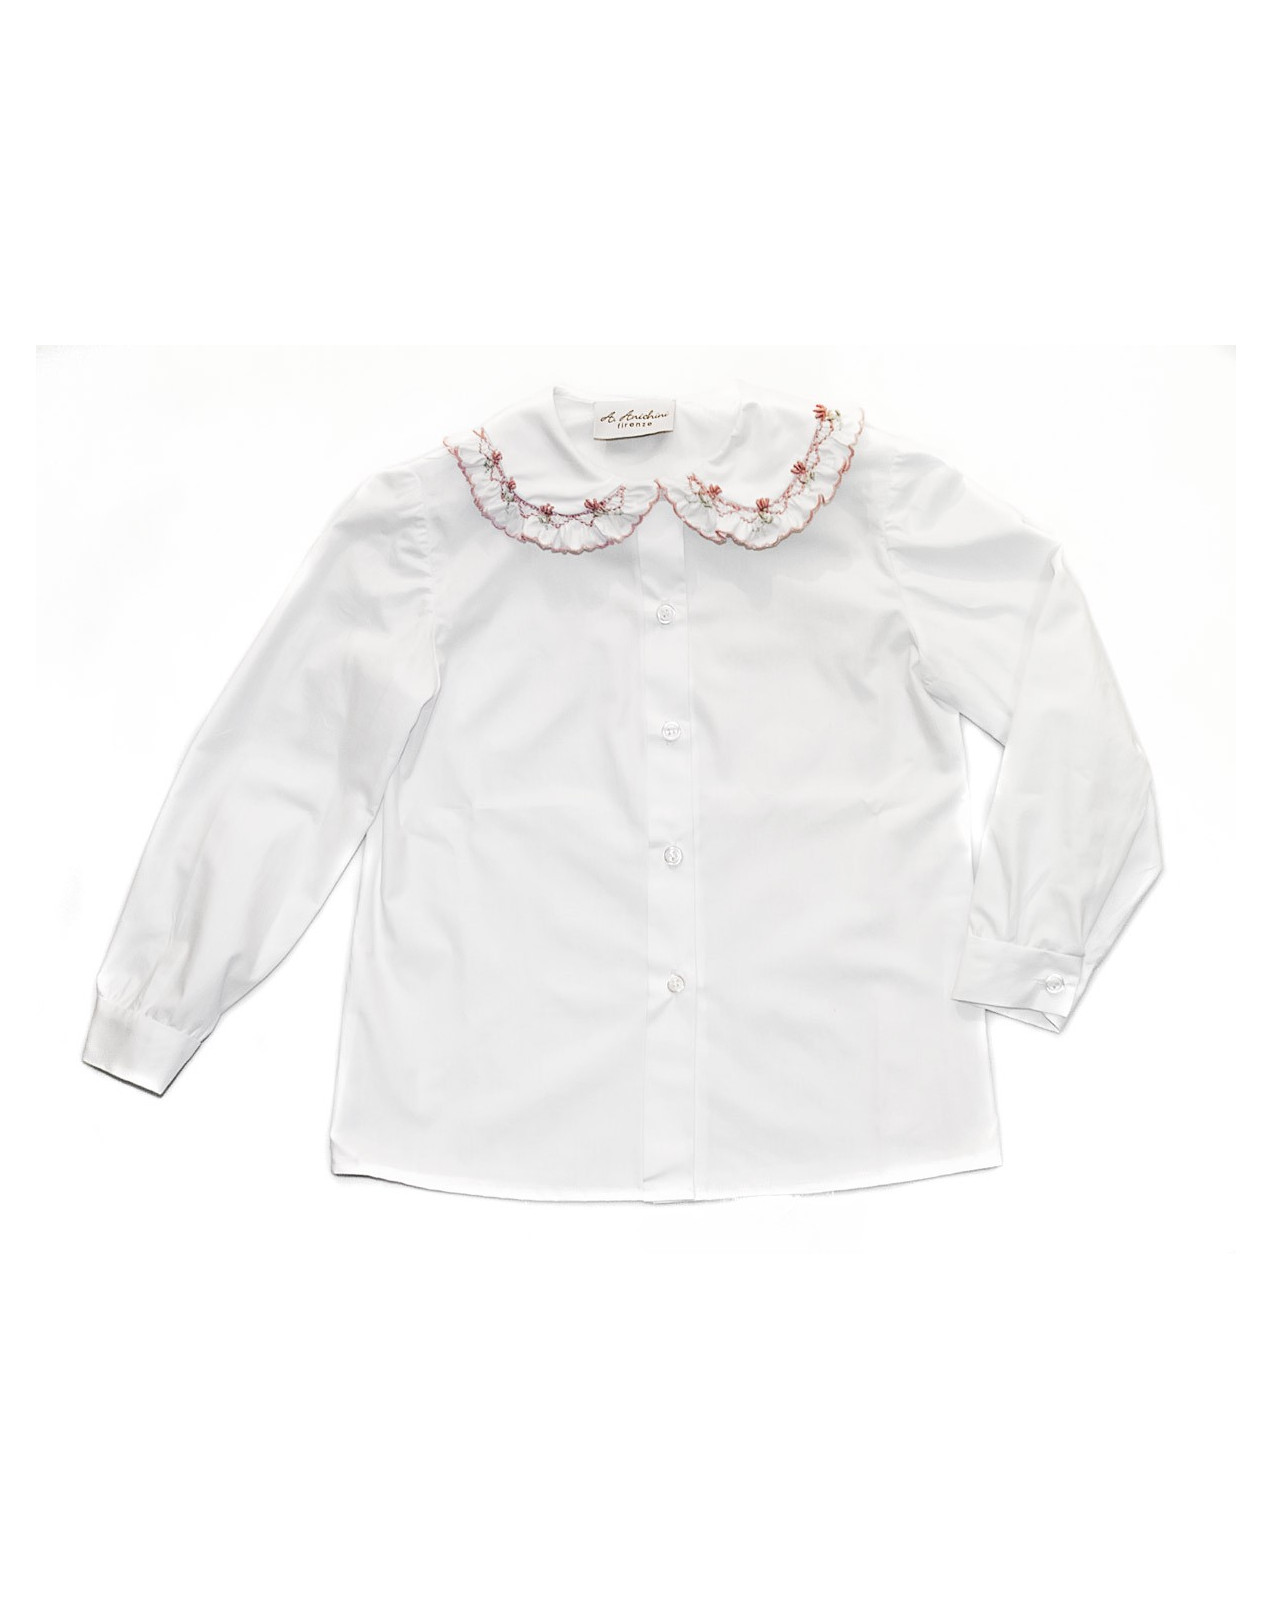 Smocked shirt 3 with floral smock